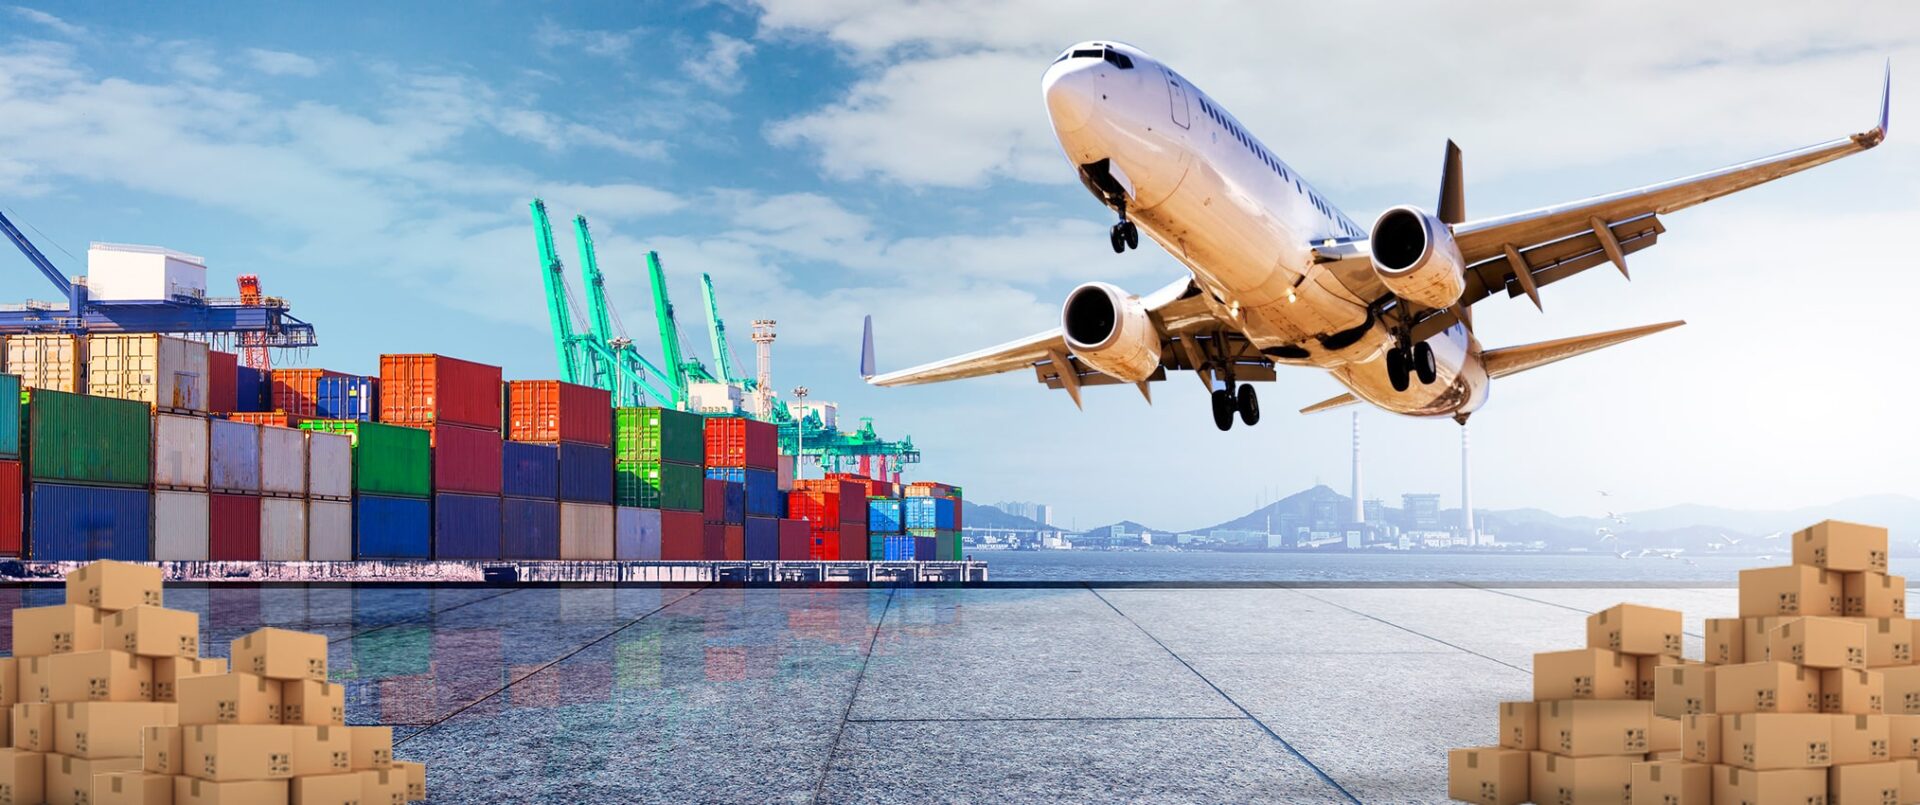 Sea Air Logistics Market Overview, Dynamic Demand, Opportunity, Scope, Outlook by 2032